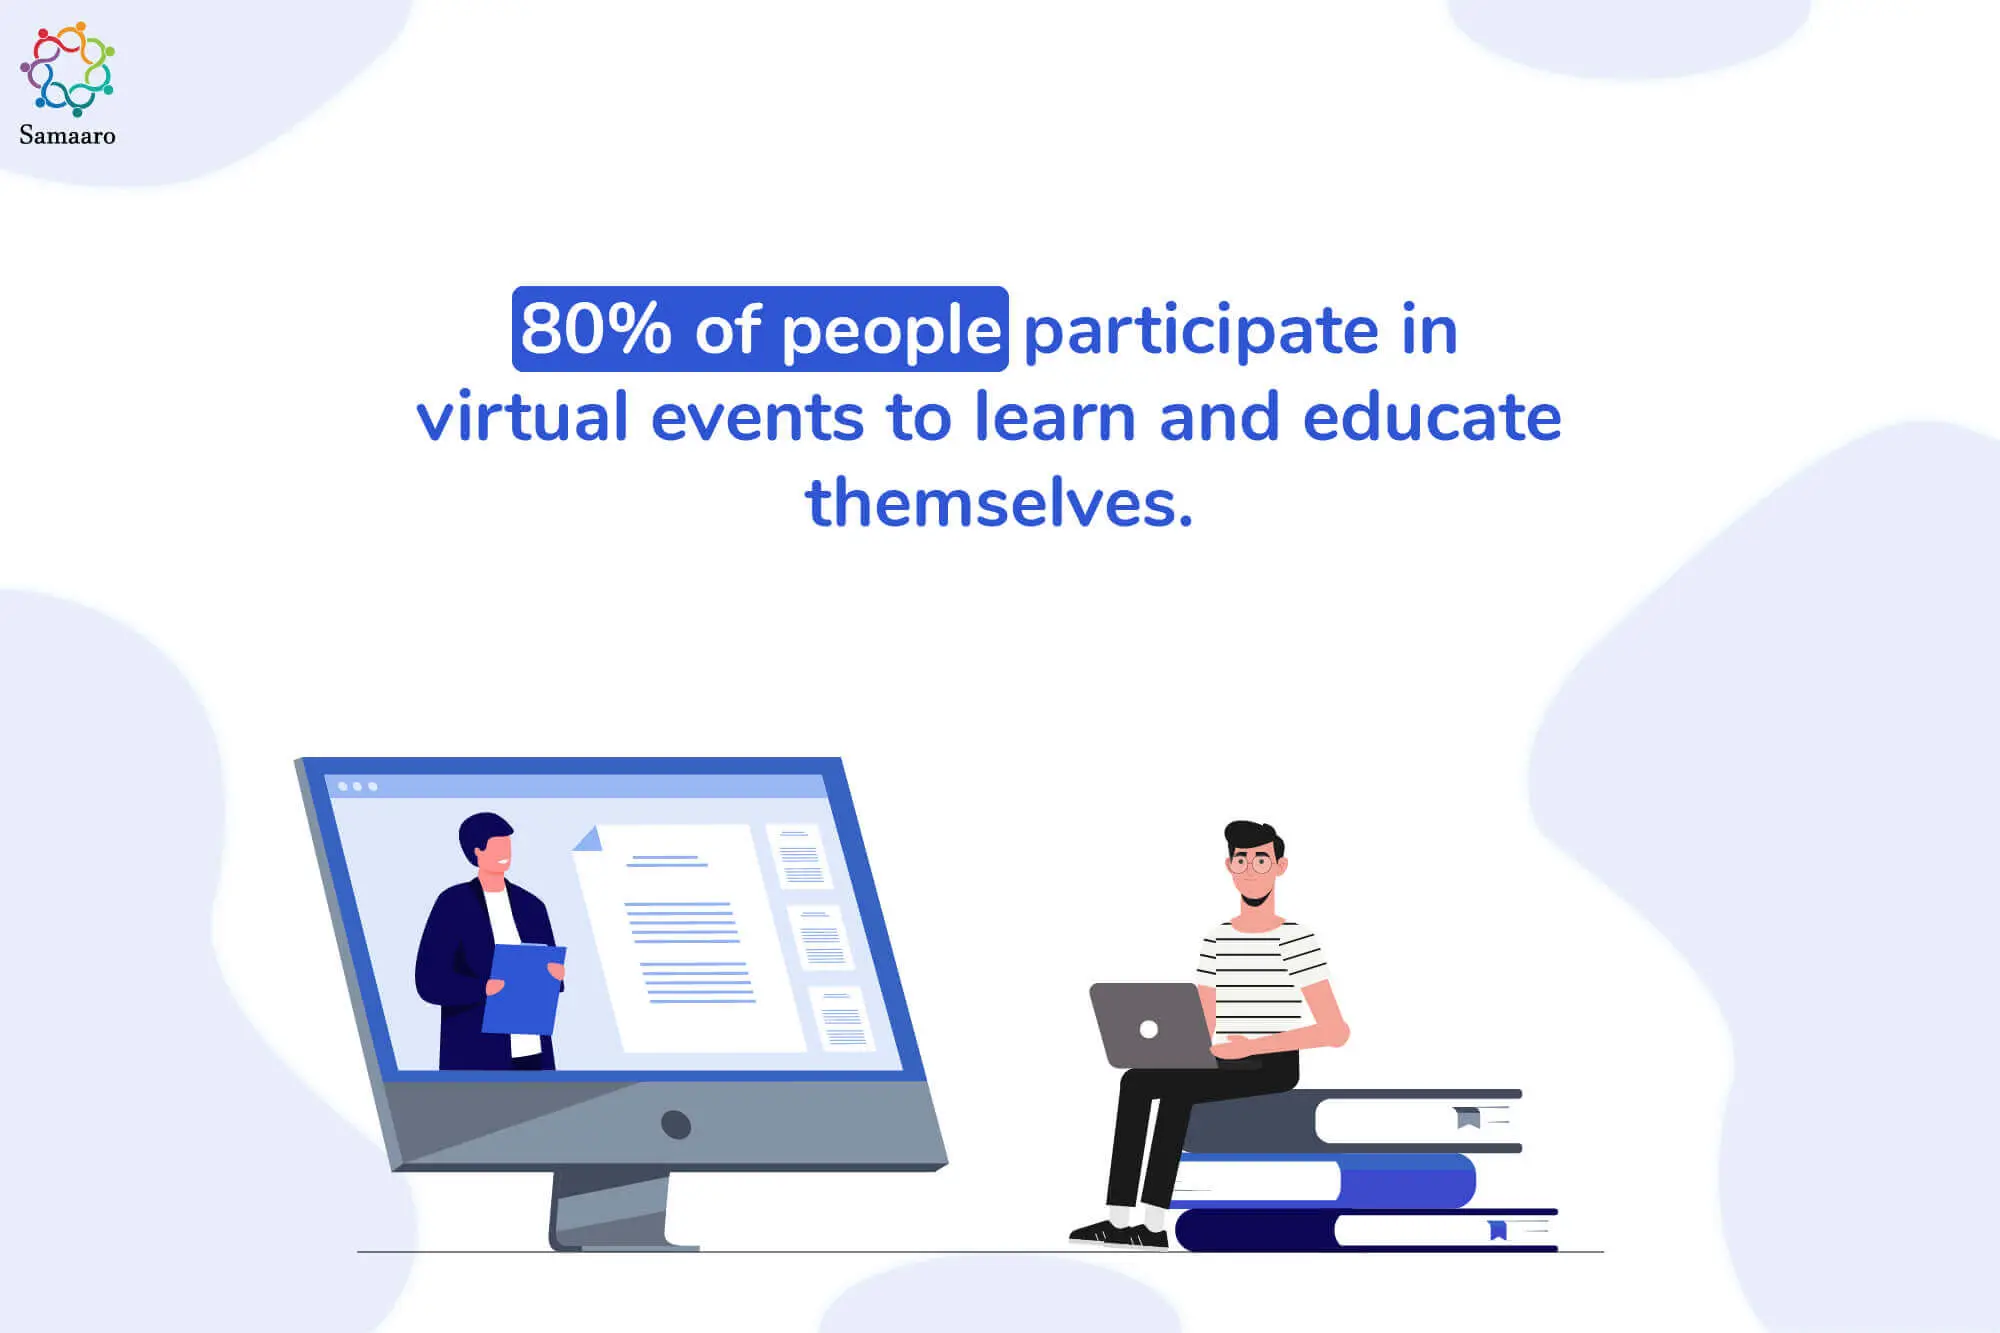 Virtual event statistics: 80% people participated in virtual events